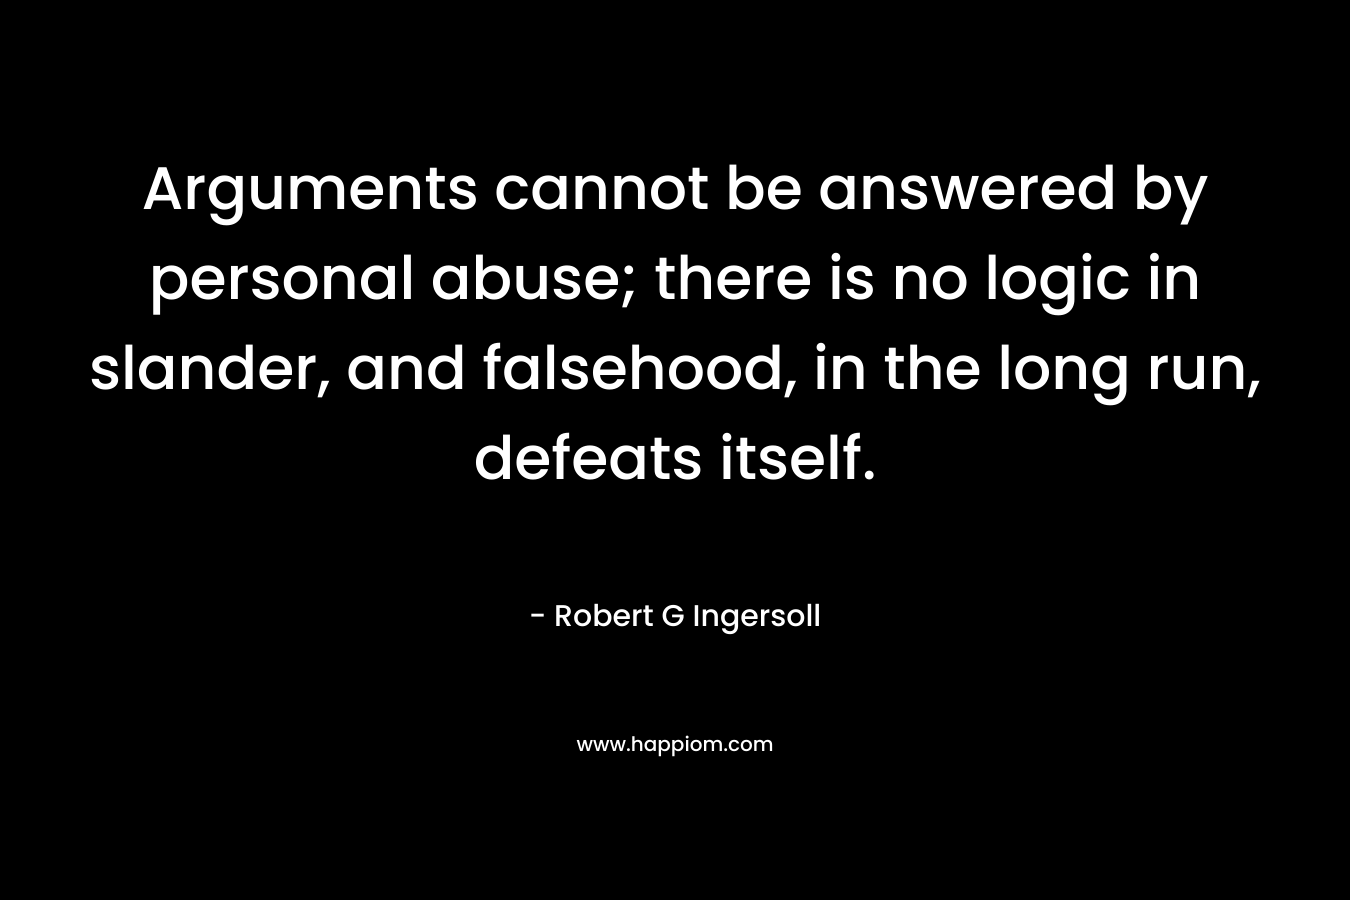 Arguments cannot be answered by personal abuse; there is no logic in slander, and falsehood, in the long run, defeats itself. – Robert G Ingersoll